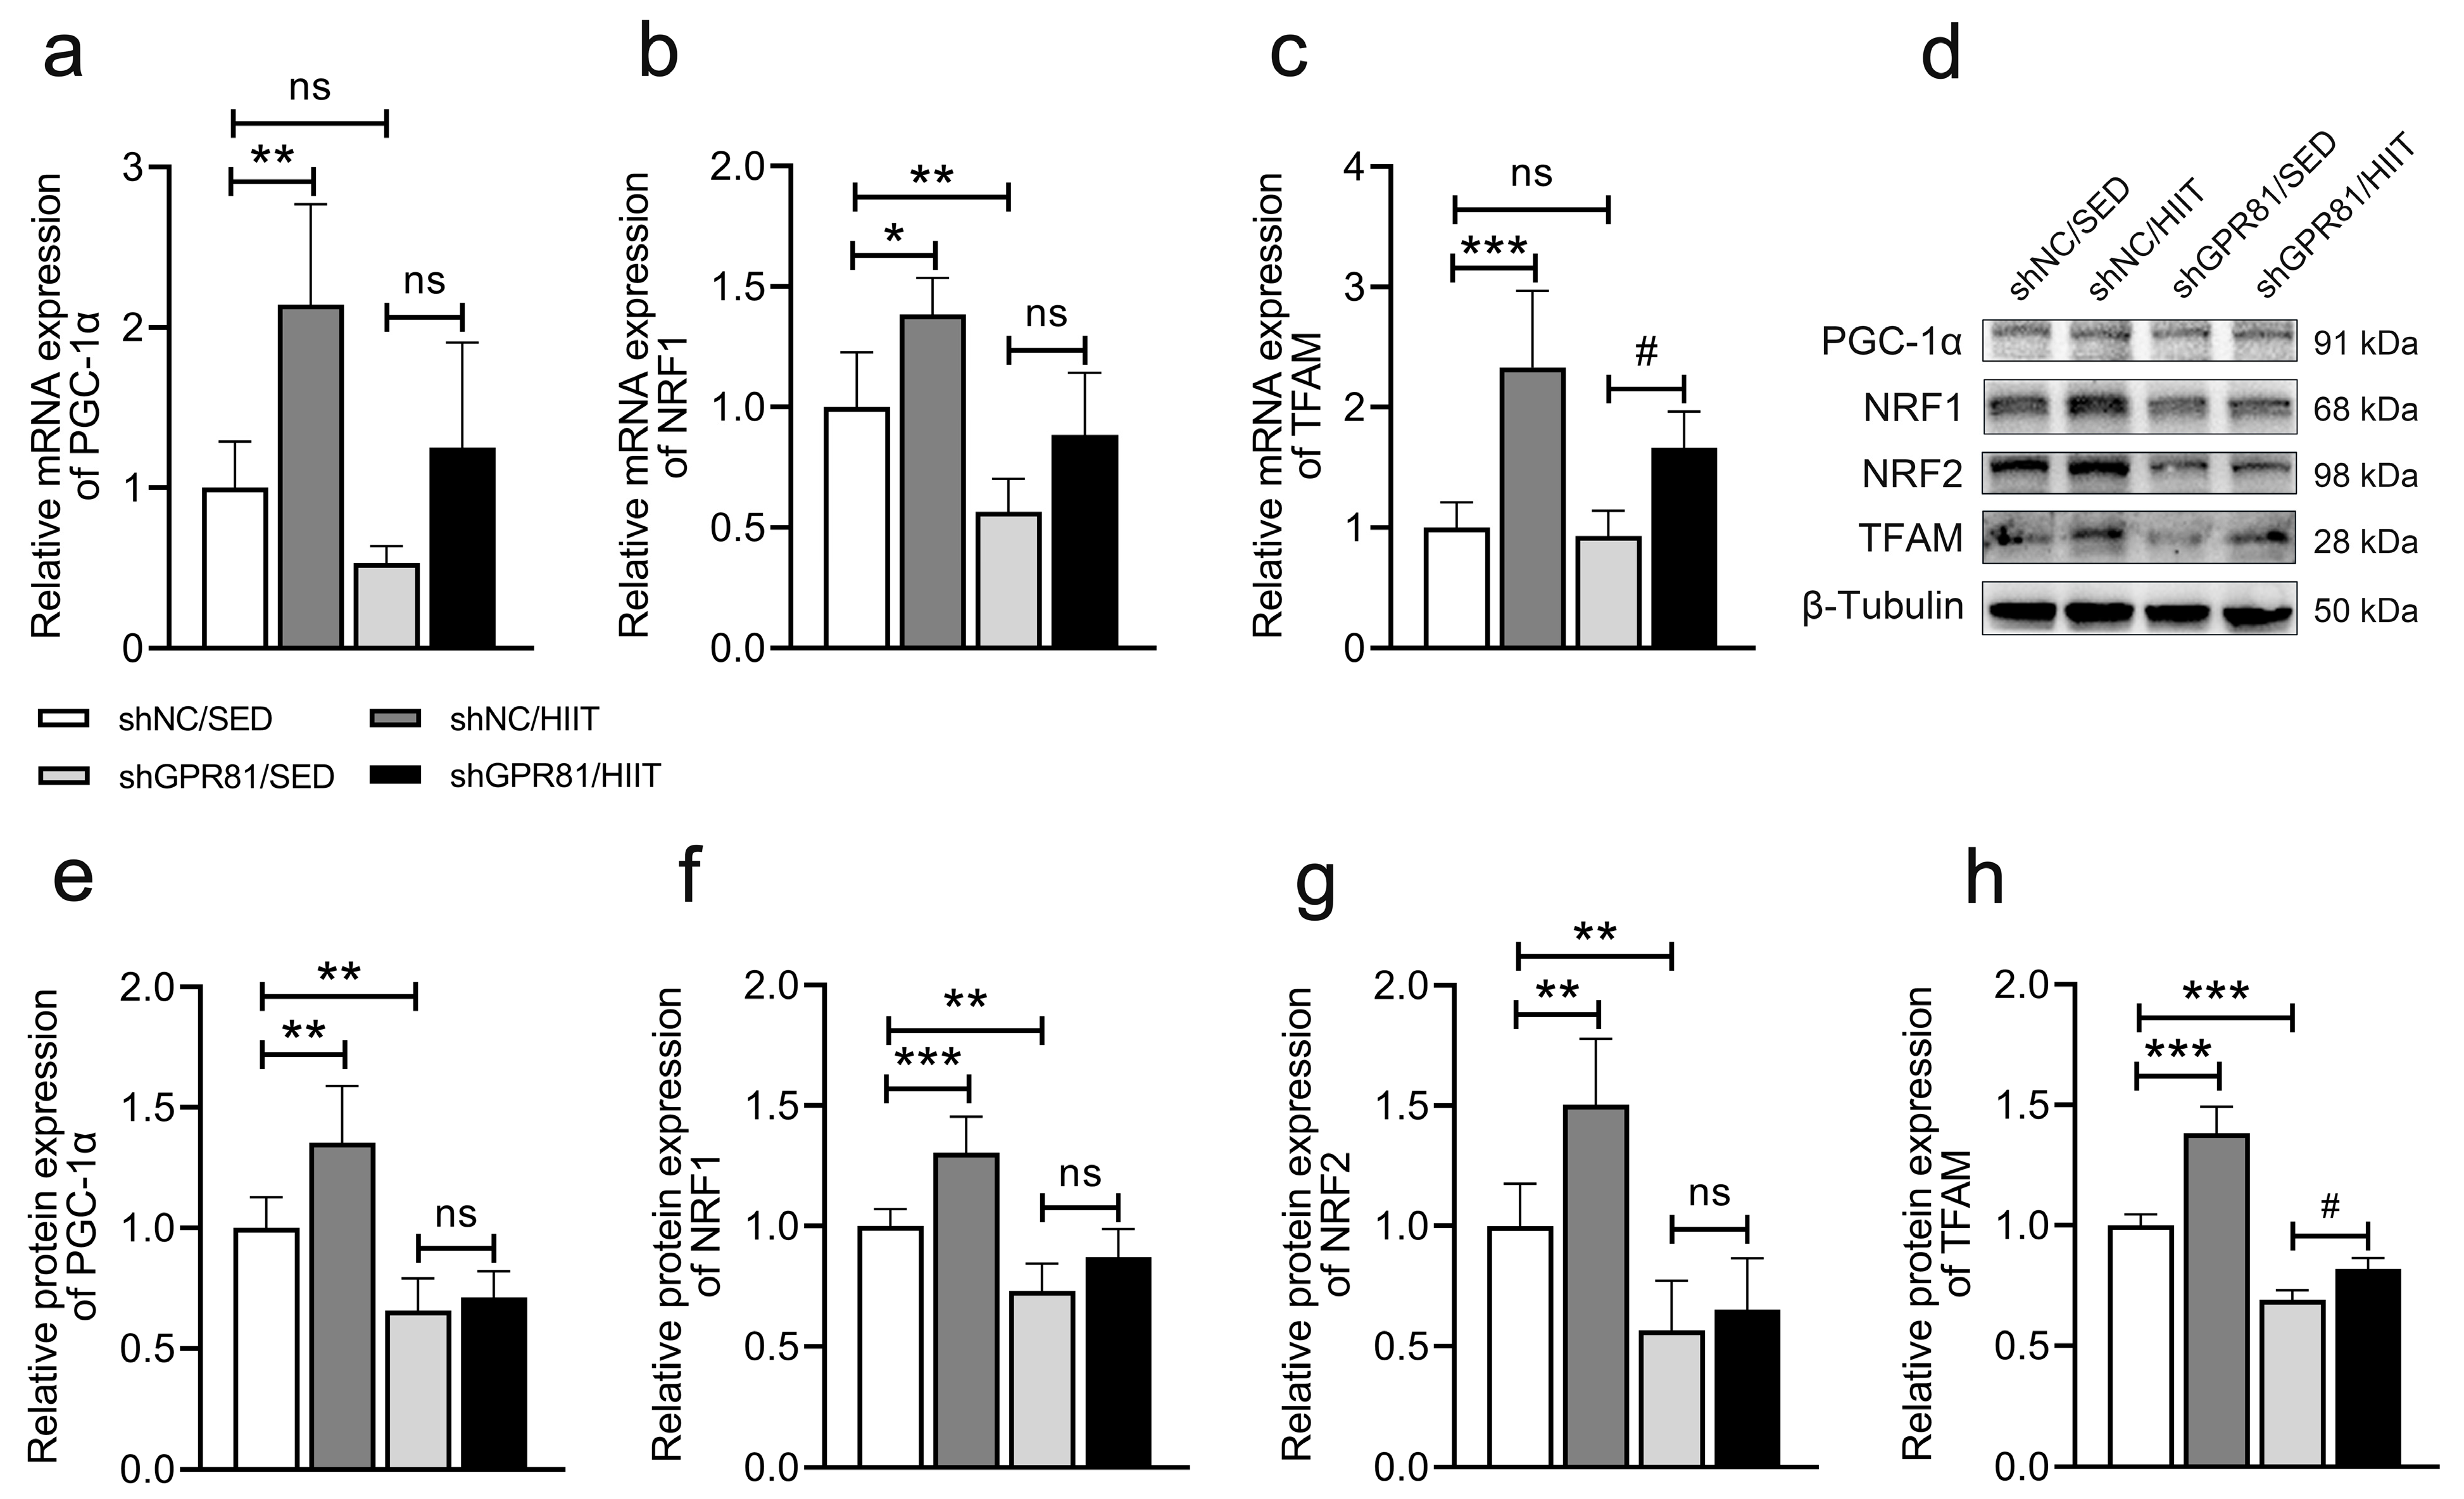 Frontiers  Elevated Lactate by High-Intensity Interval Training Regulates  the Hippocampal BDNF Expression and the Mitochondrial Quality Control System